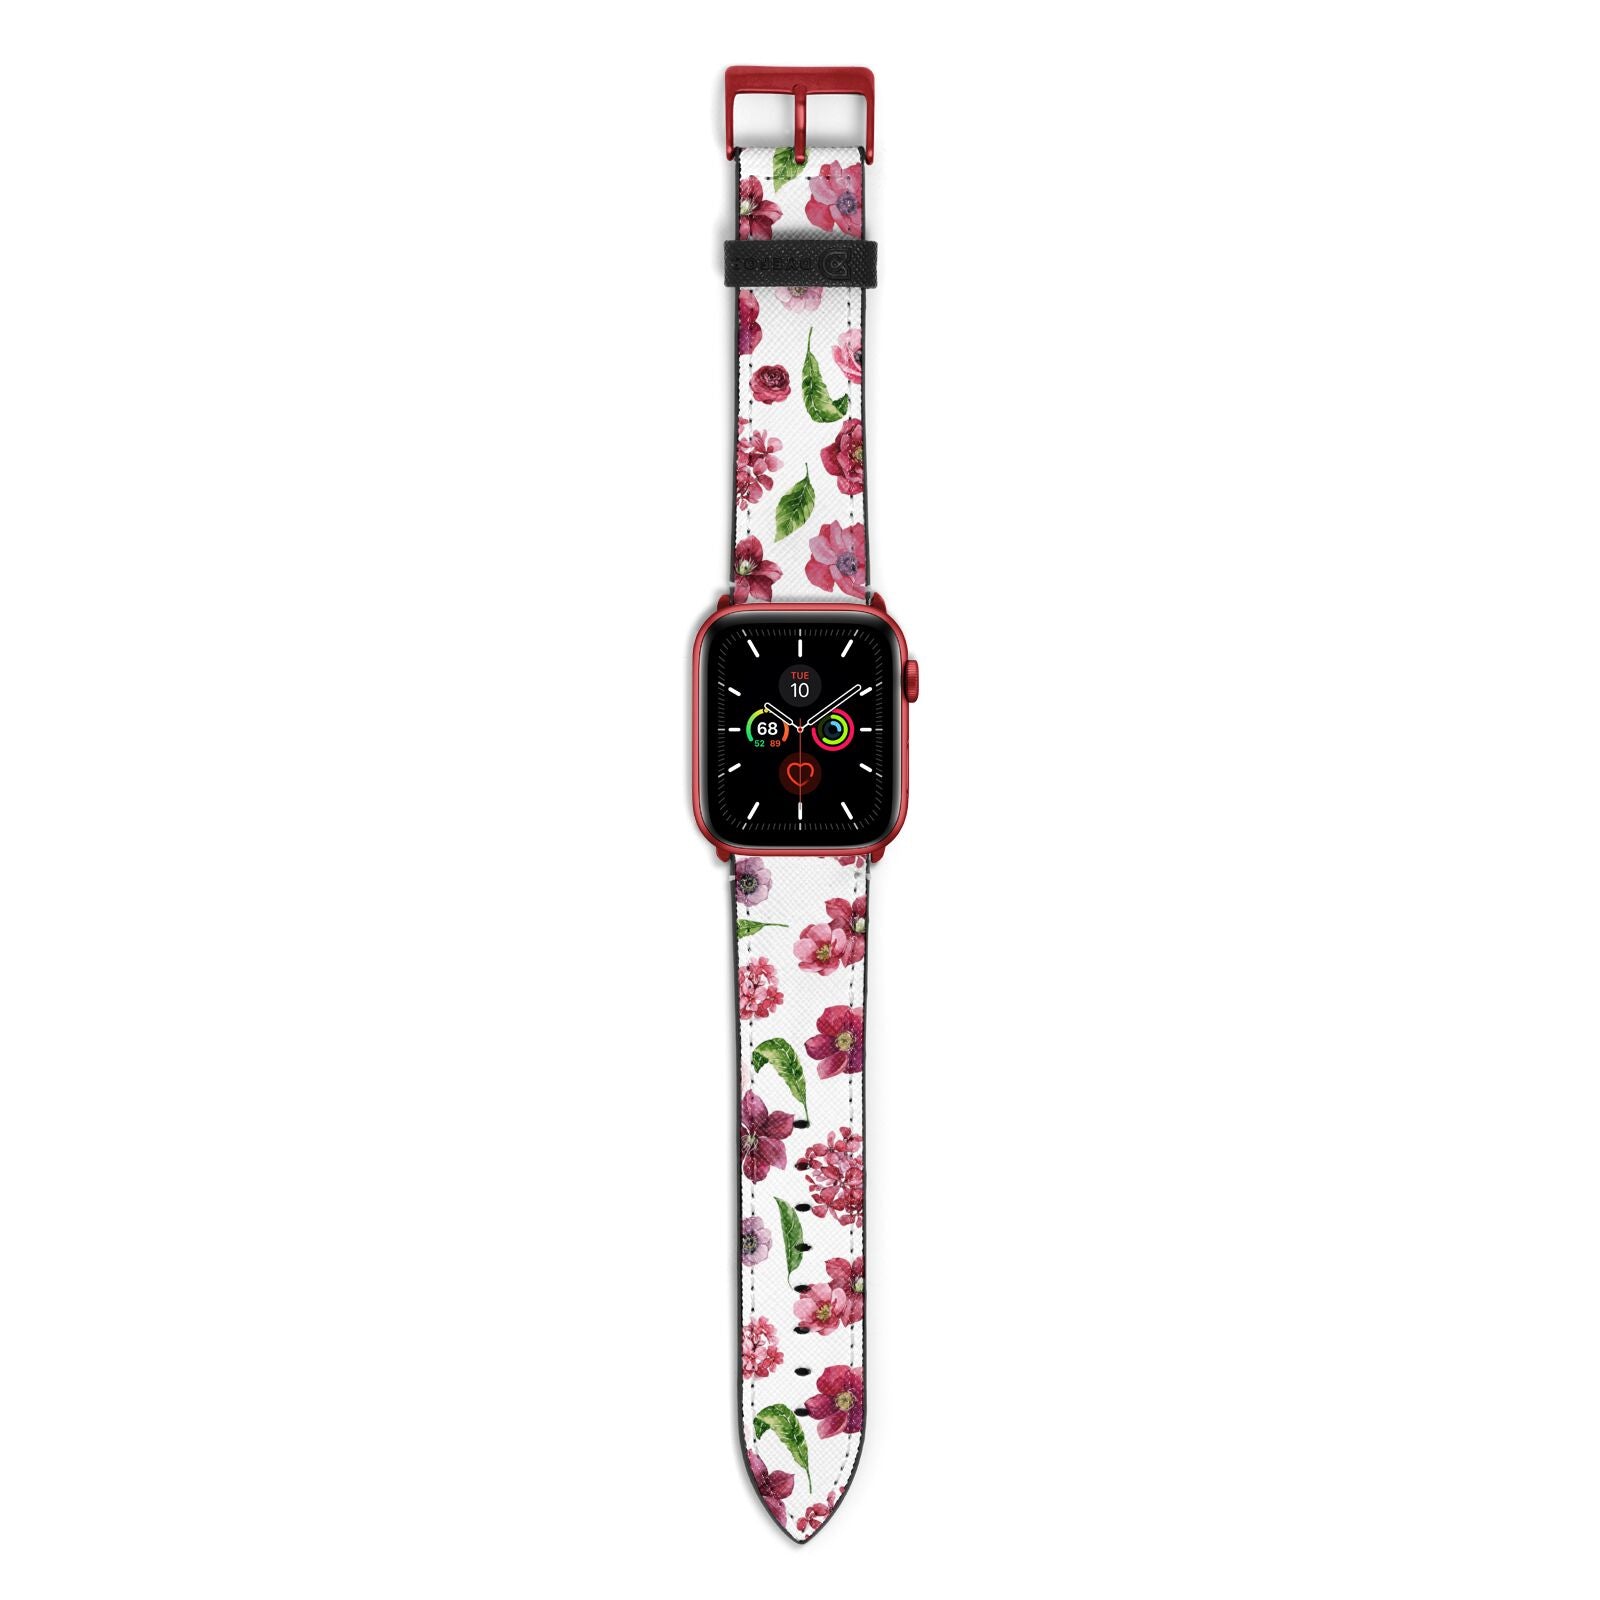 Pink Floral Apple Watch Strap with Red Hardware